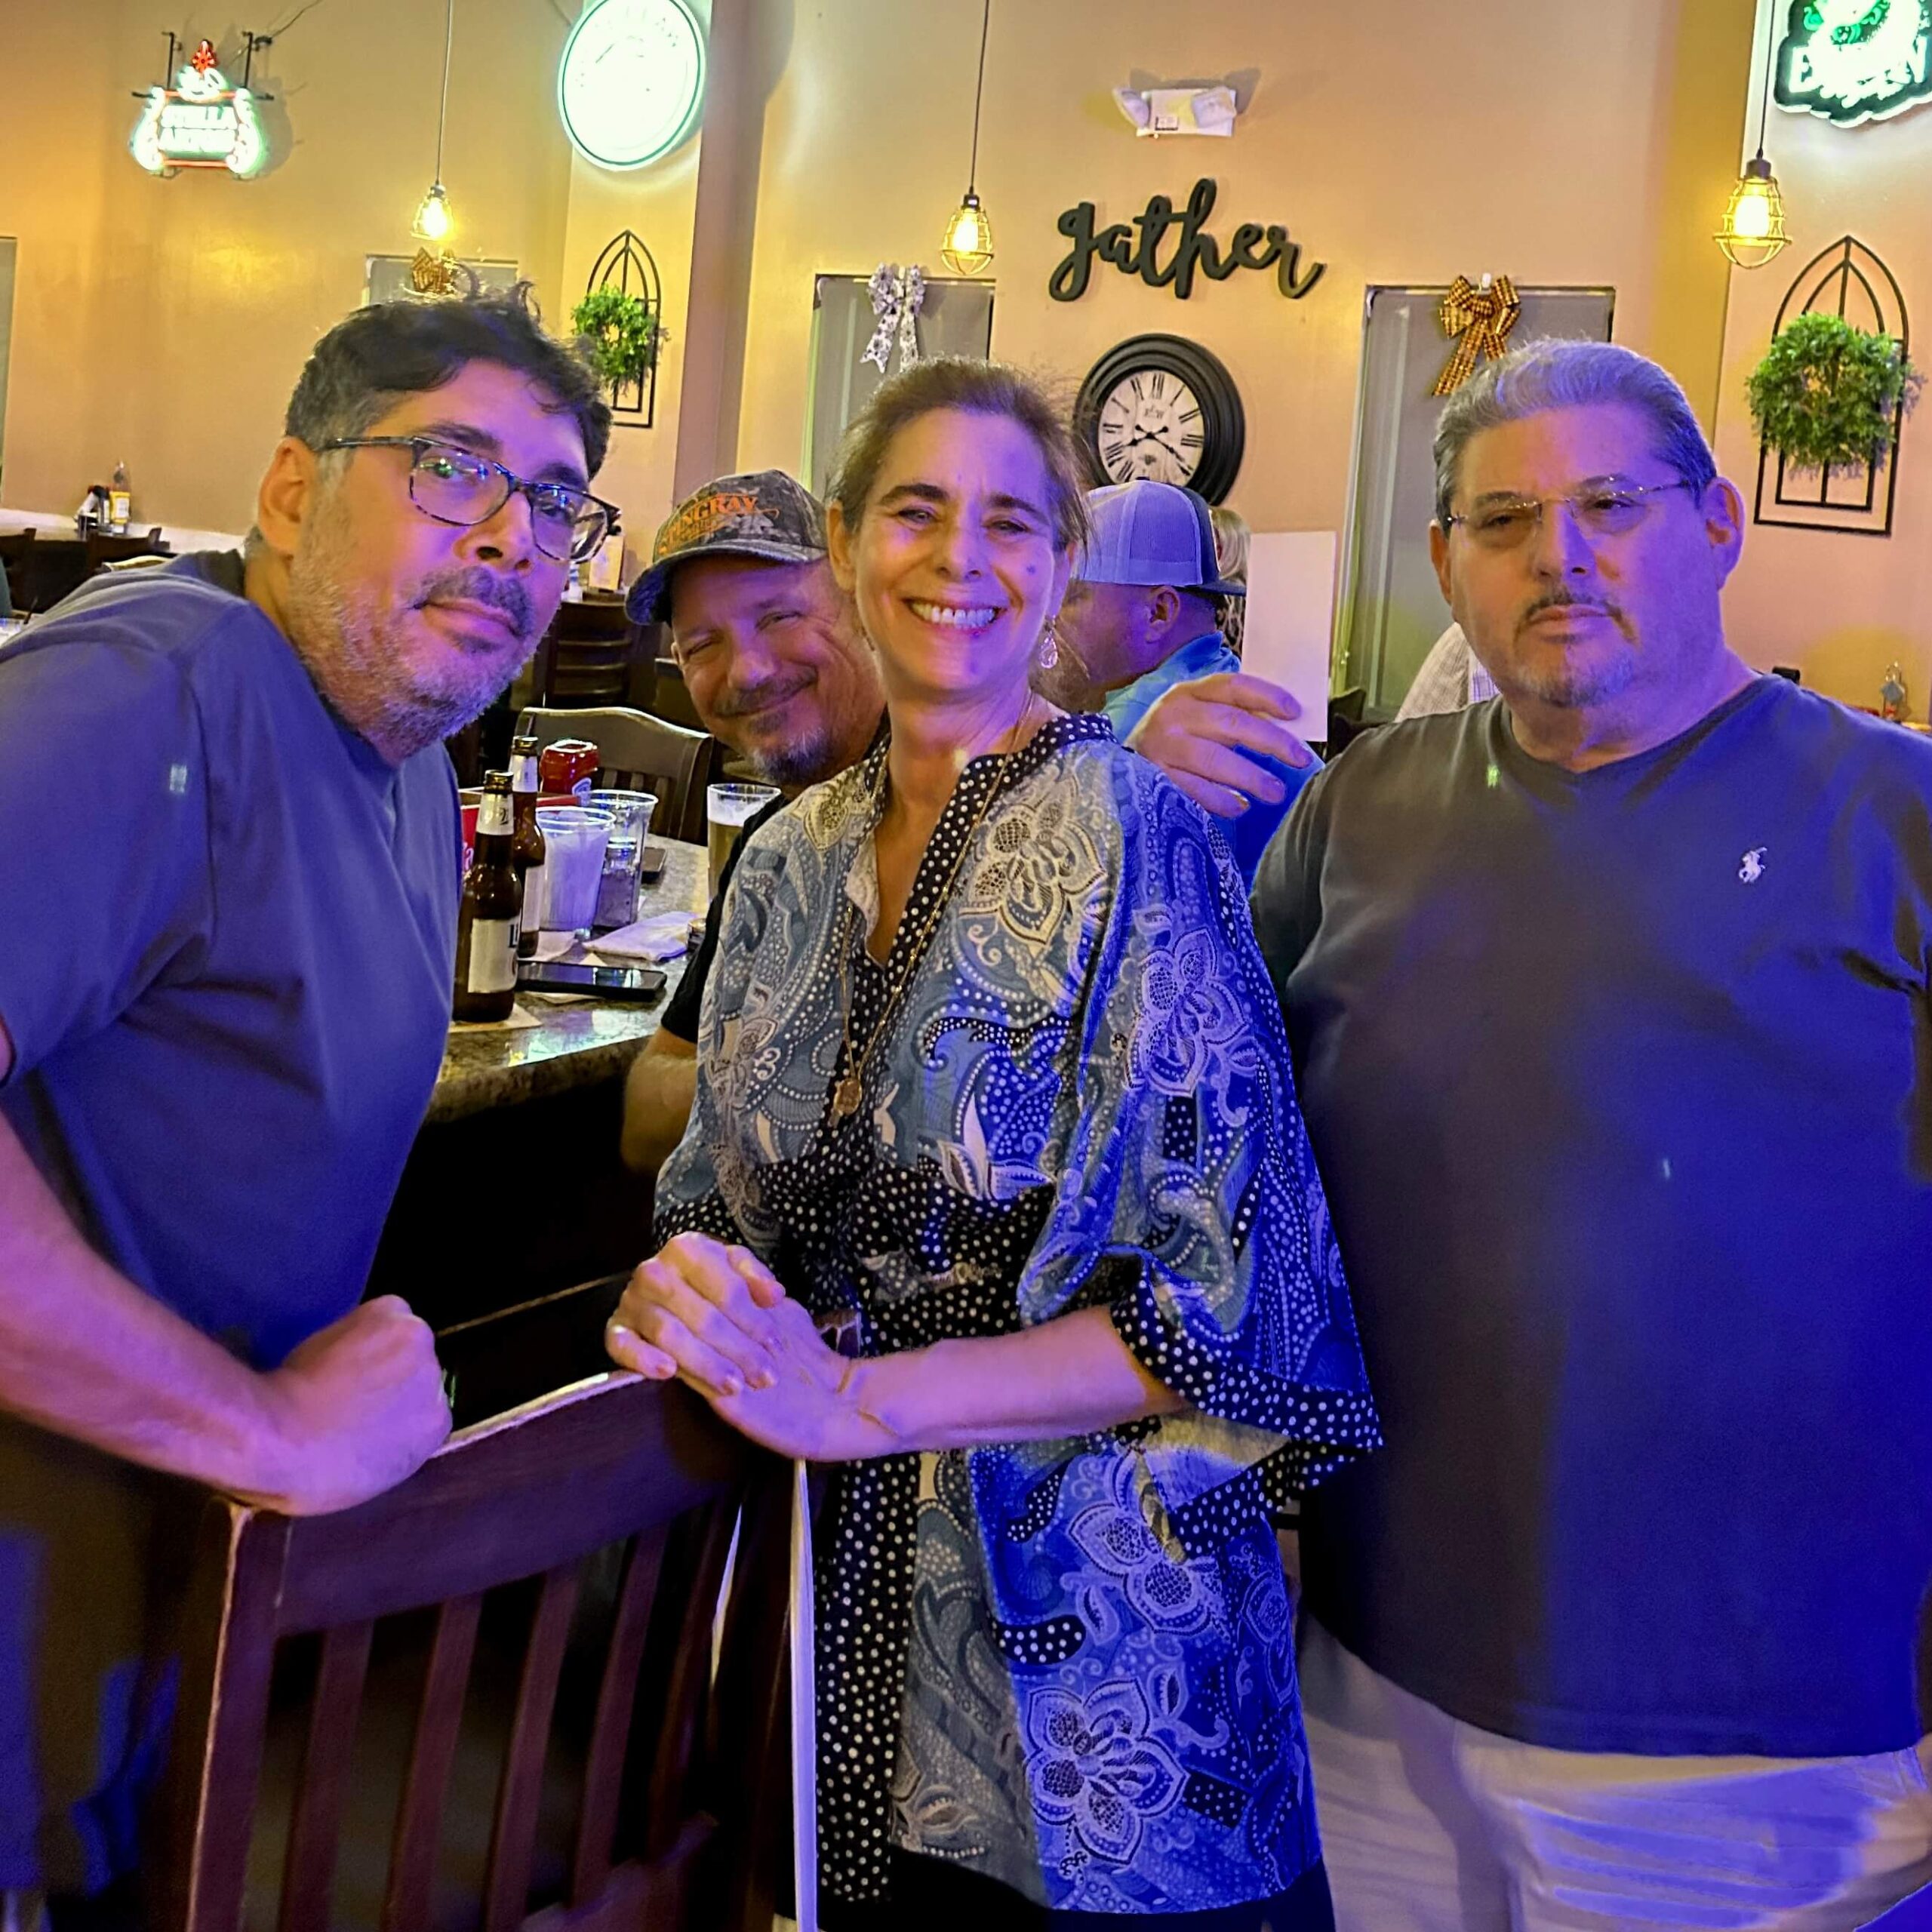 Lefty's Tavern & Grille Coral Springs FL 33076 trivia night 8